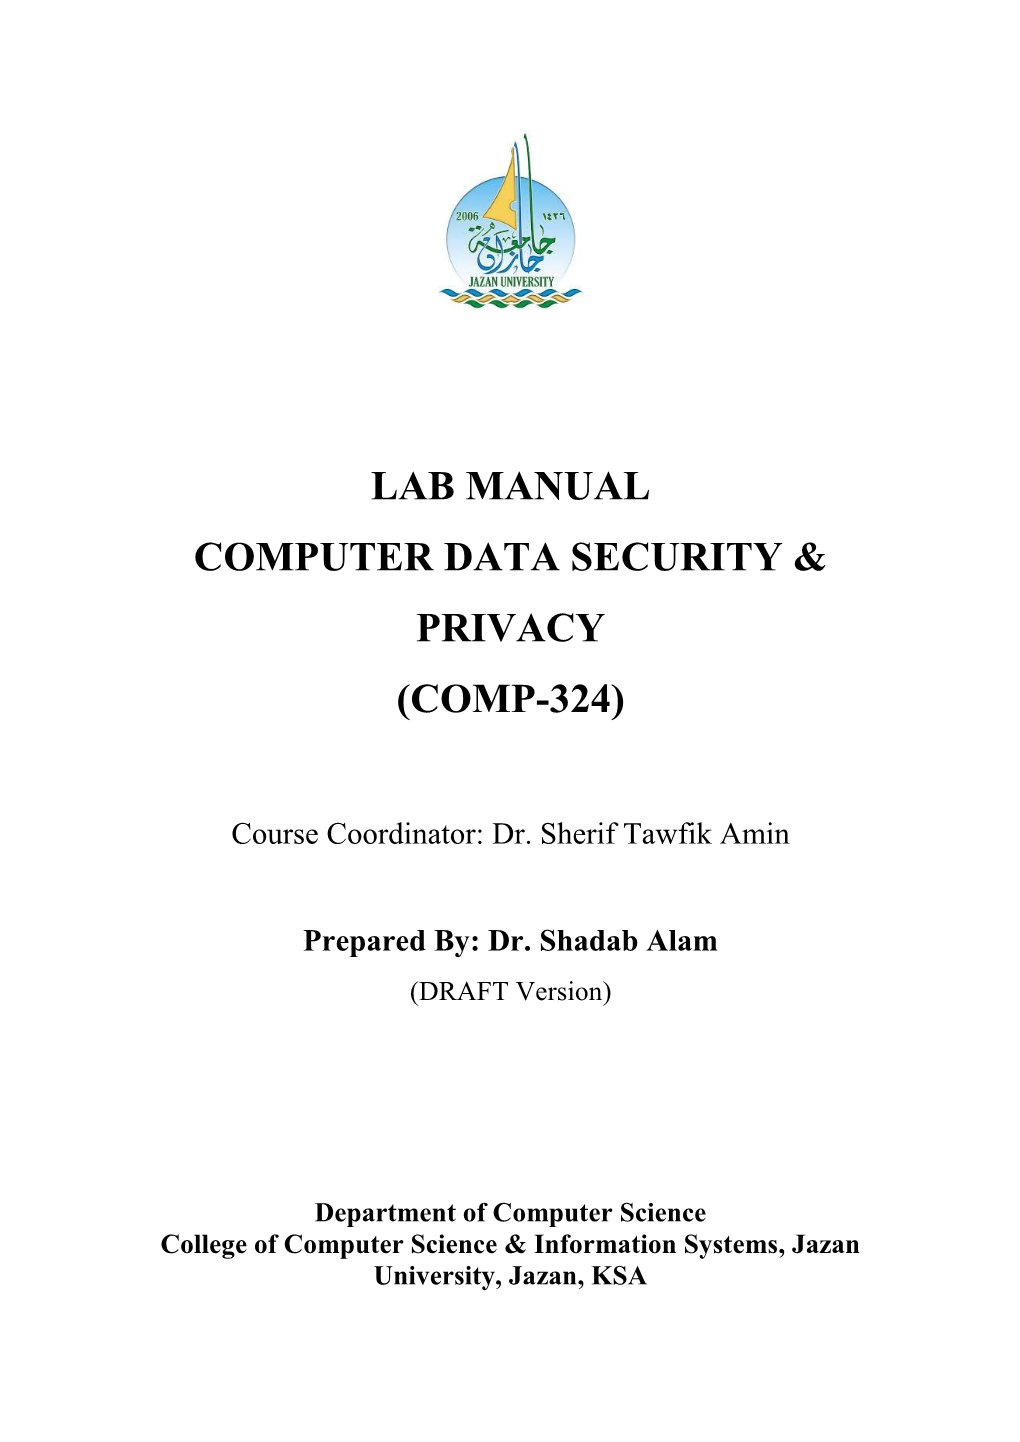 Lab Manual Computer Data Security & Privacy (Comp-324)